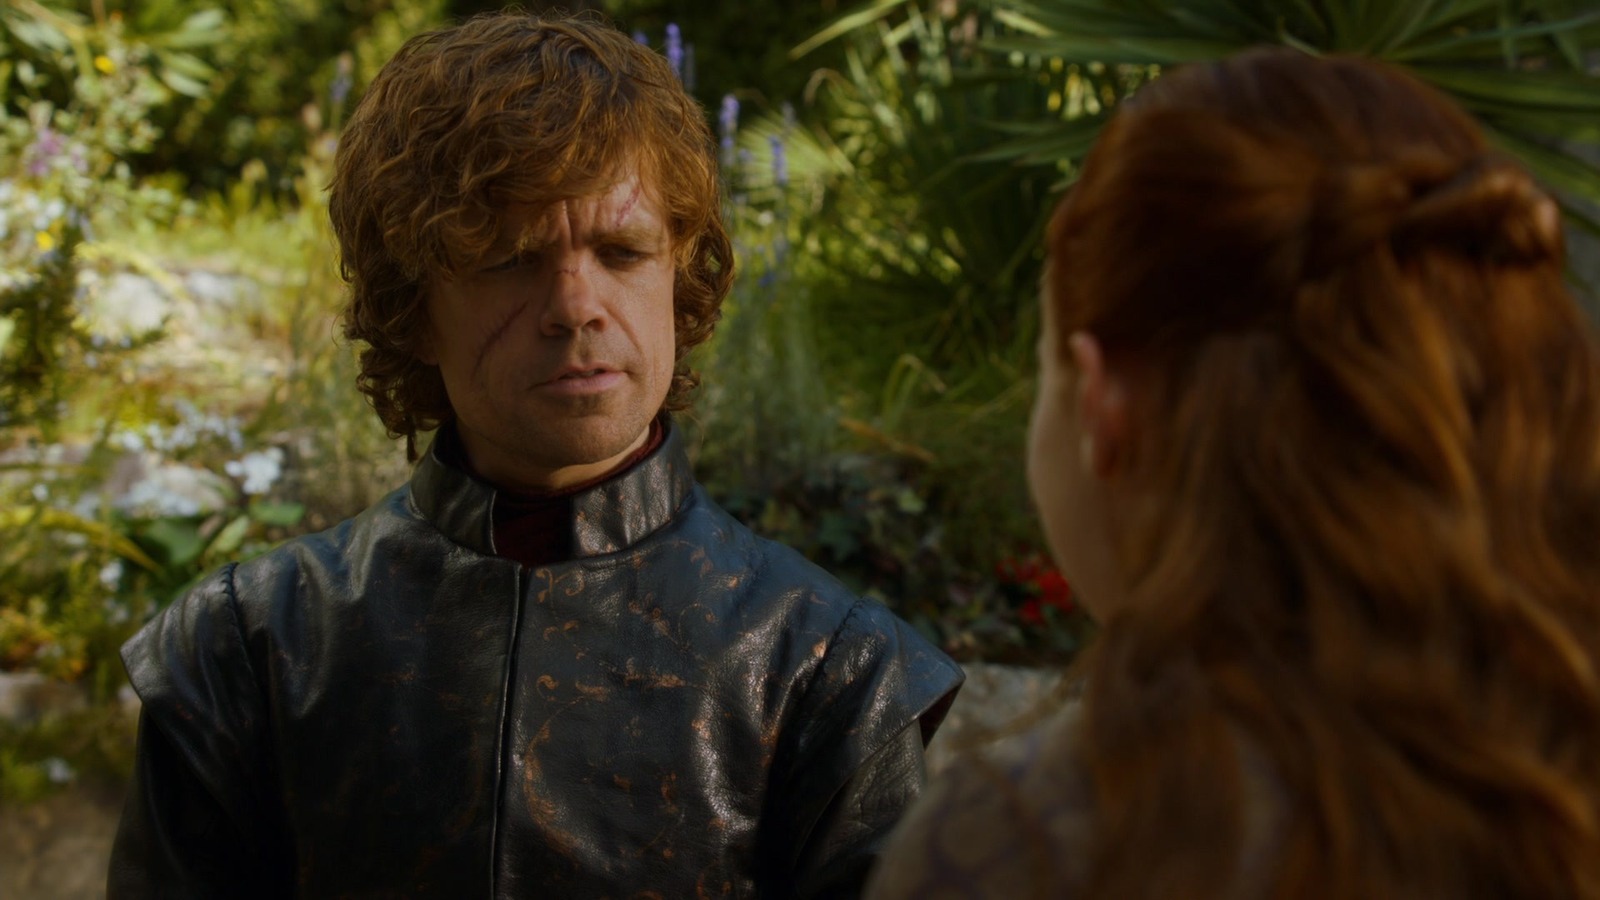 Peter Dinklage Was Immediately Opposed To Game Of Thrones – So What Changed His Mind?